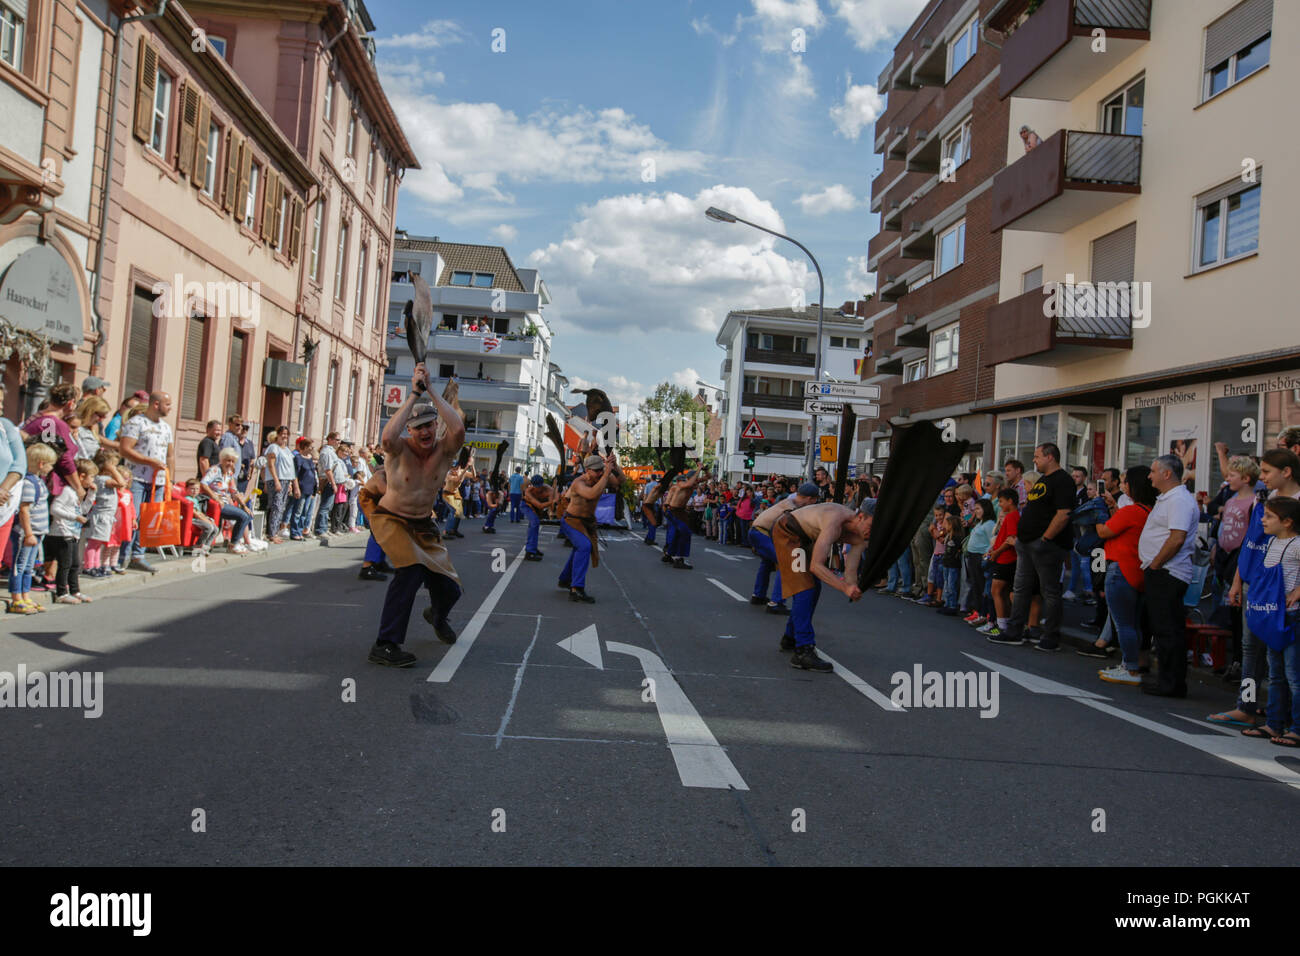 Worms, Germany. 26th Aug, 2018. Local students perform the dance of the leather workers in the parade. The first highlight of the 2018 Backfischfest was the big parade through the city of Worms with over 70 groups and floats. Community groups, music groups and businesses from Worms and further afield took part. Credit: Michael Debets/Pacific Press/Alamy Live News Stock Photo